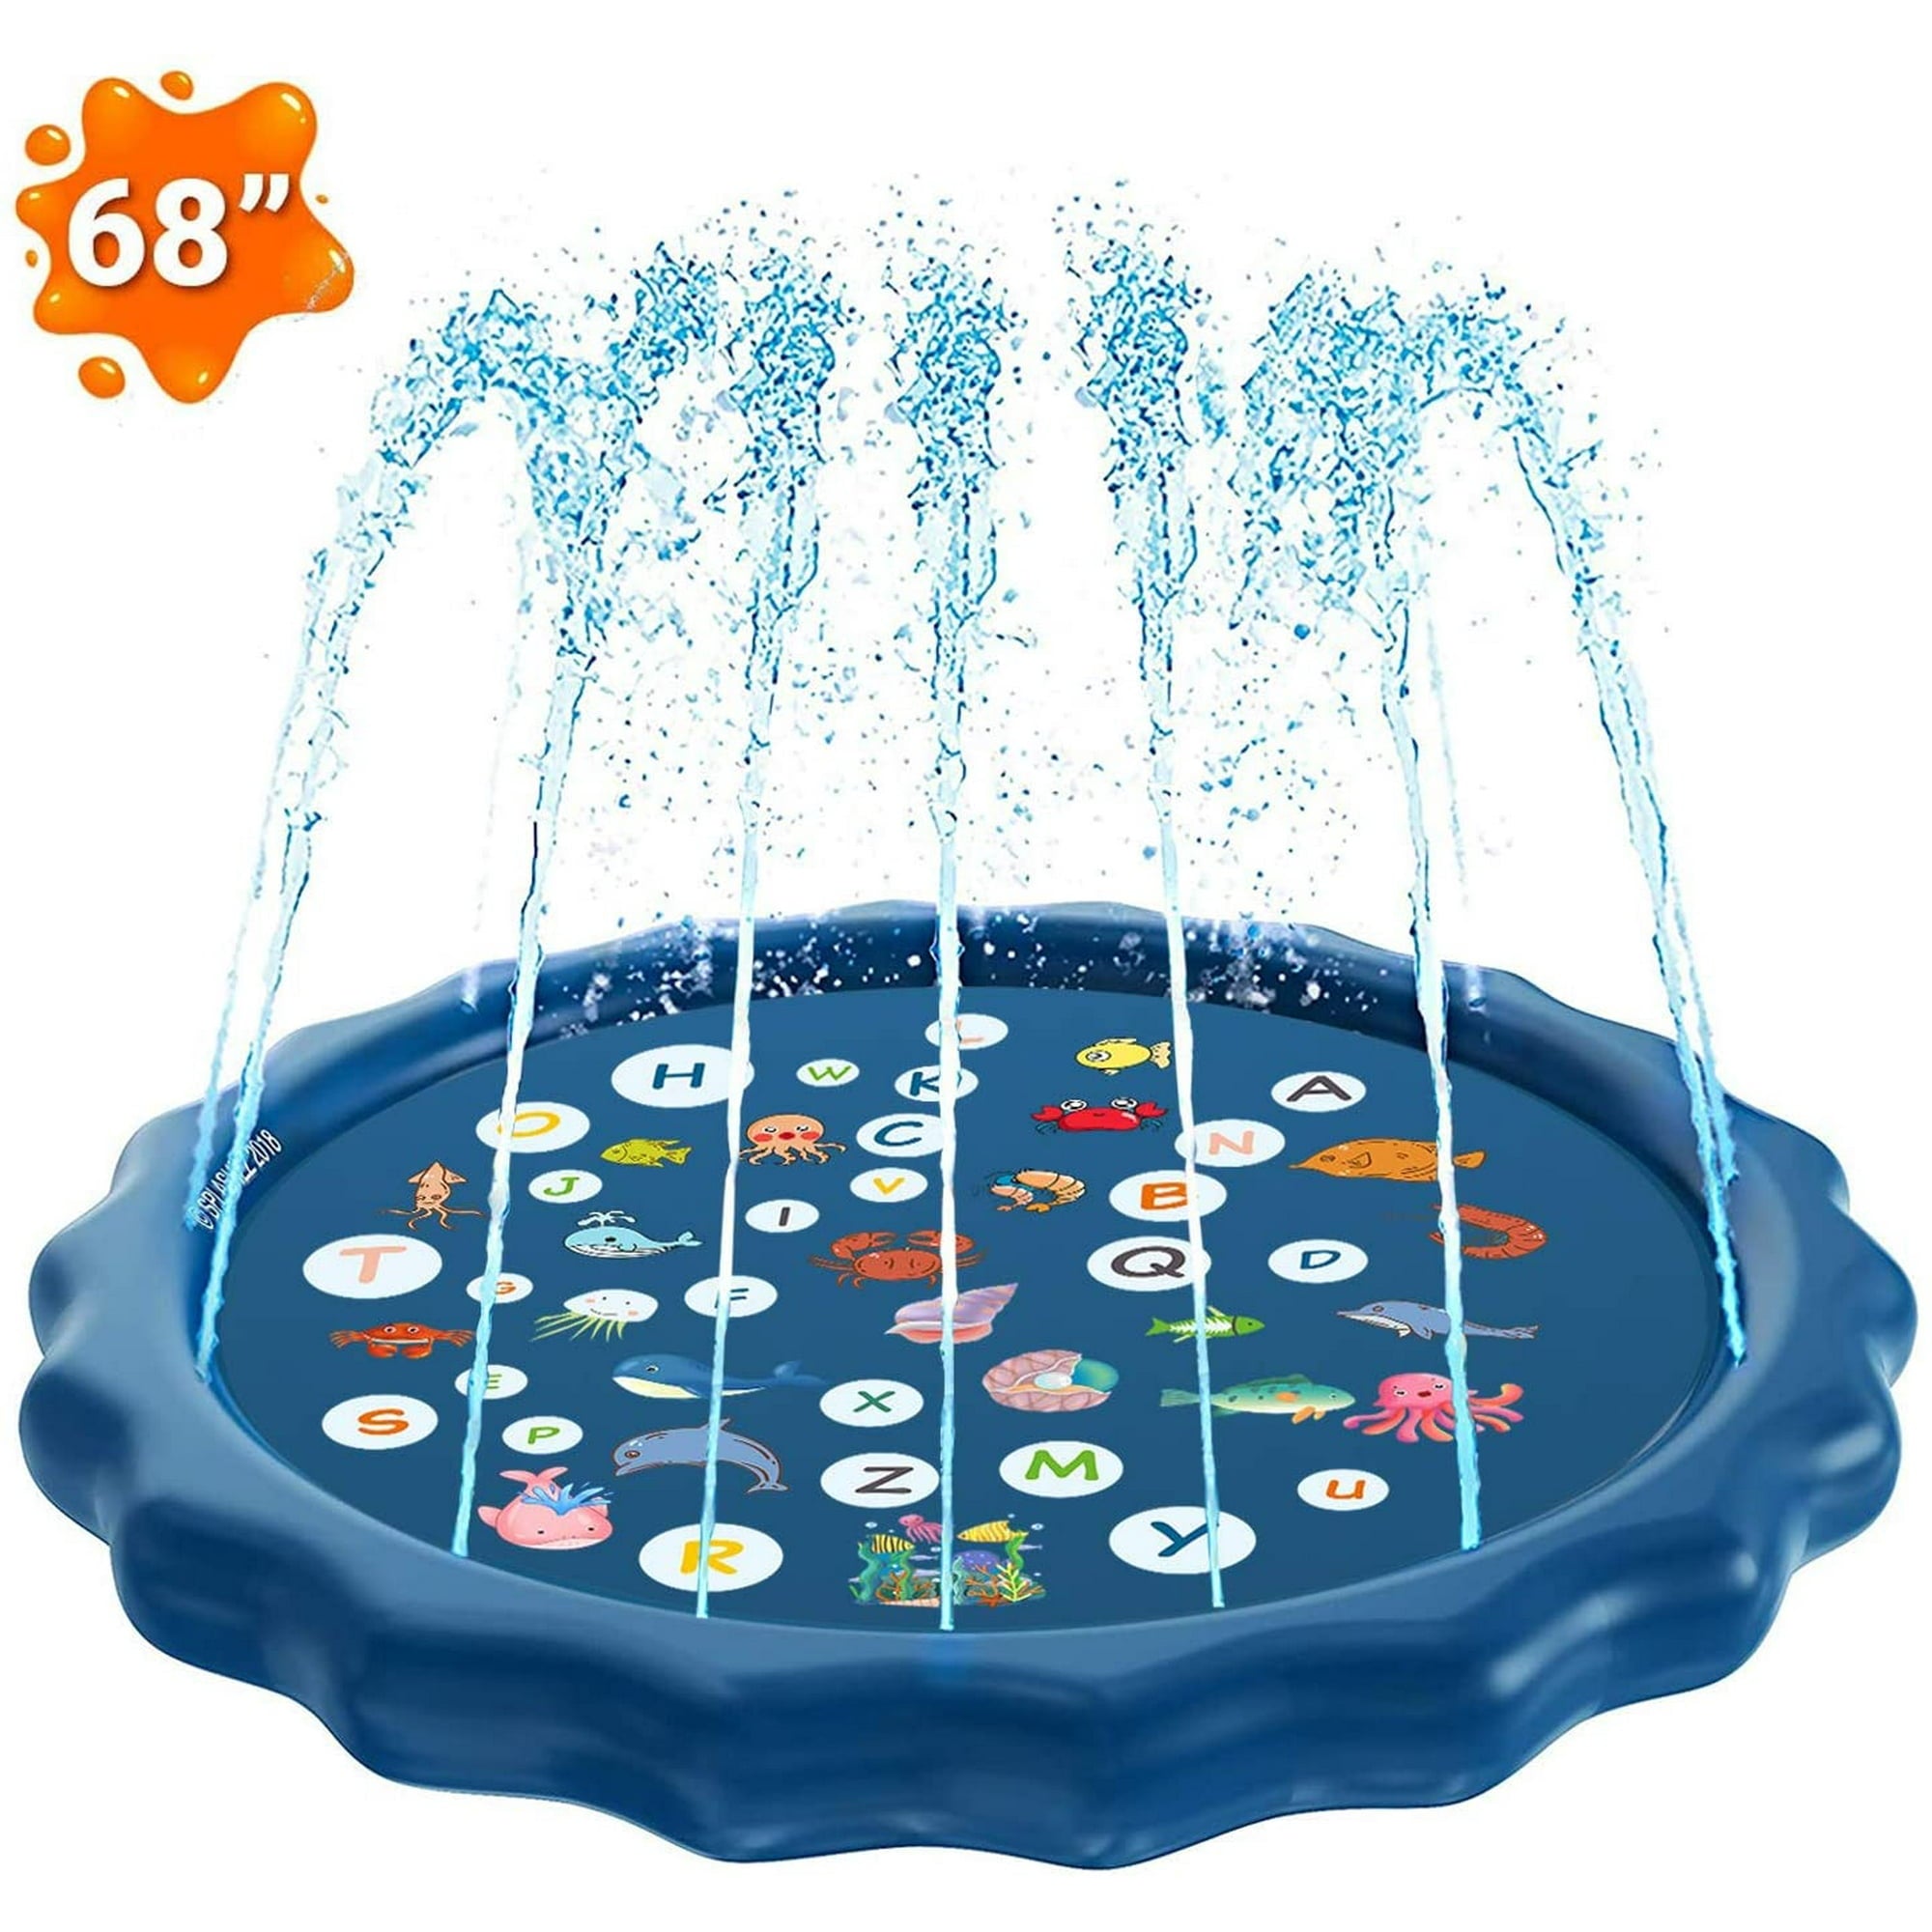 Victoria 68" Sprinkler Splash Pad for Kids, Inflatable Outdoor Water Mat Toys Wading Swimming Pool, Kiddie Summer Toys for 1-12 Years Old Children Toddler- Blue